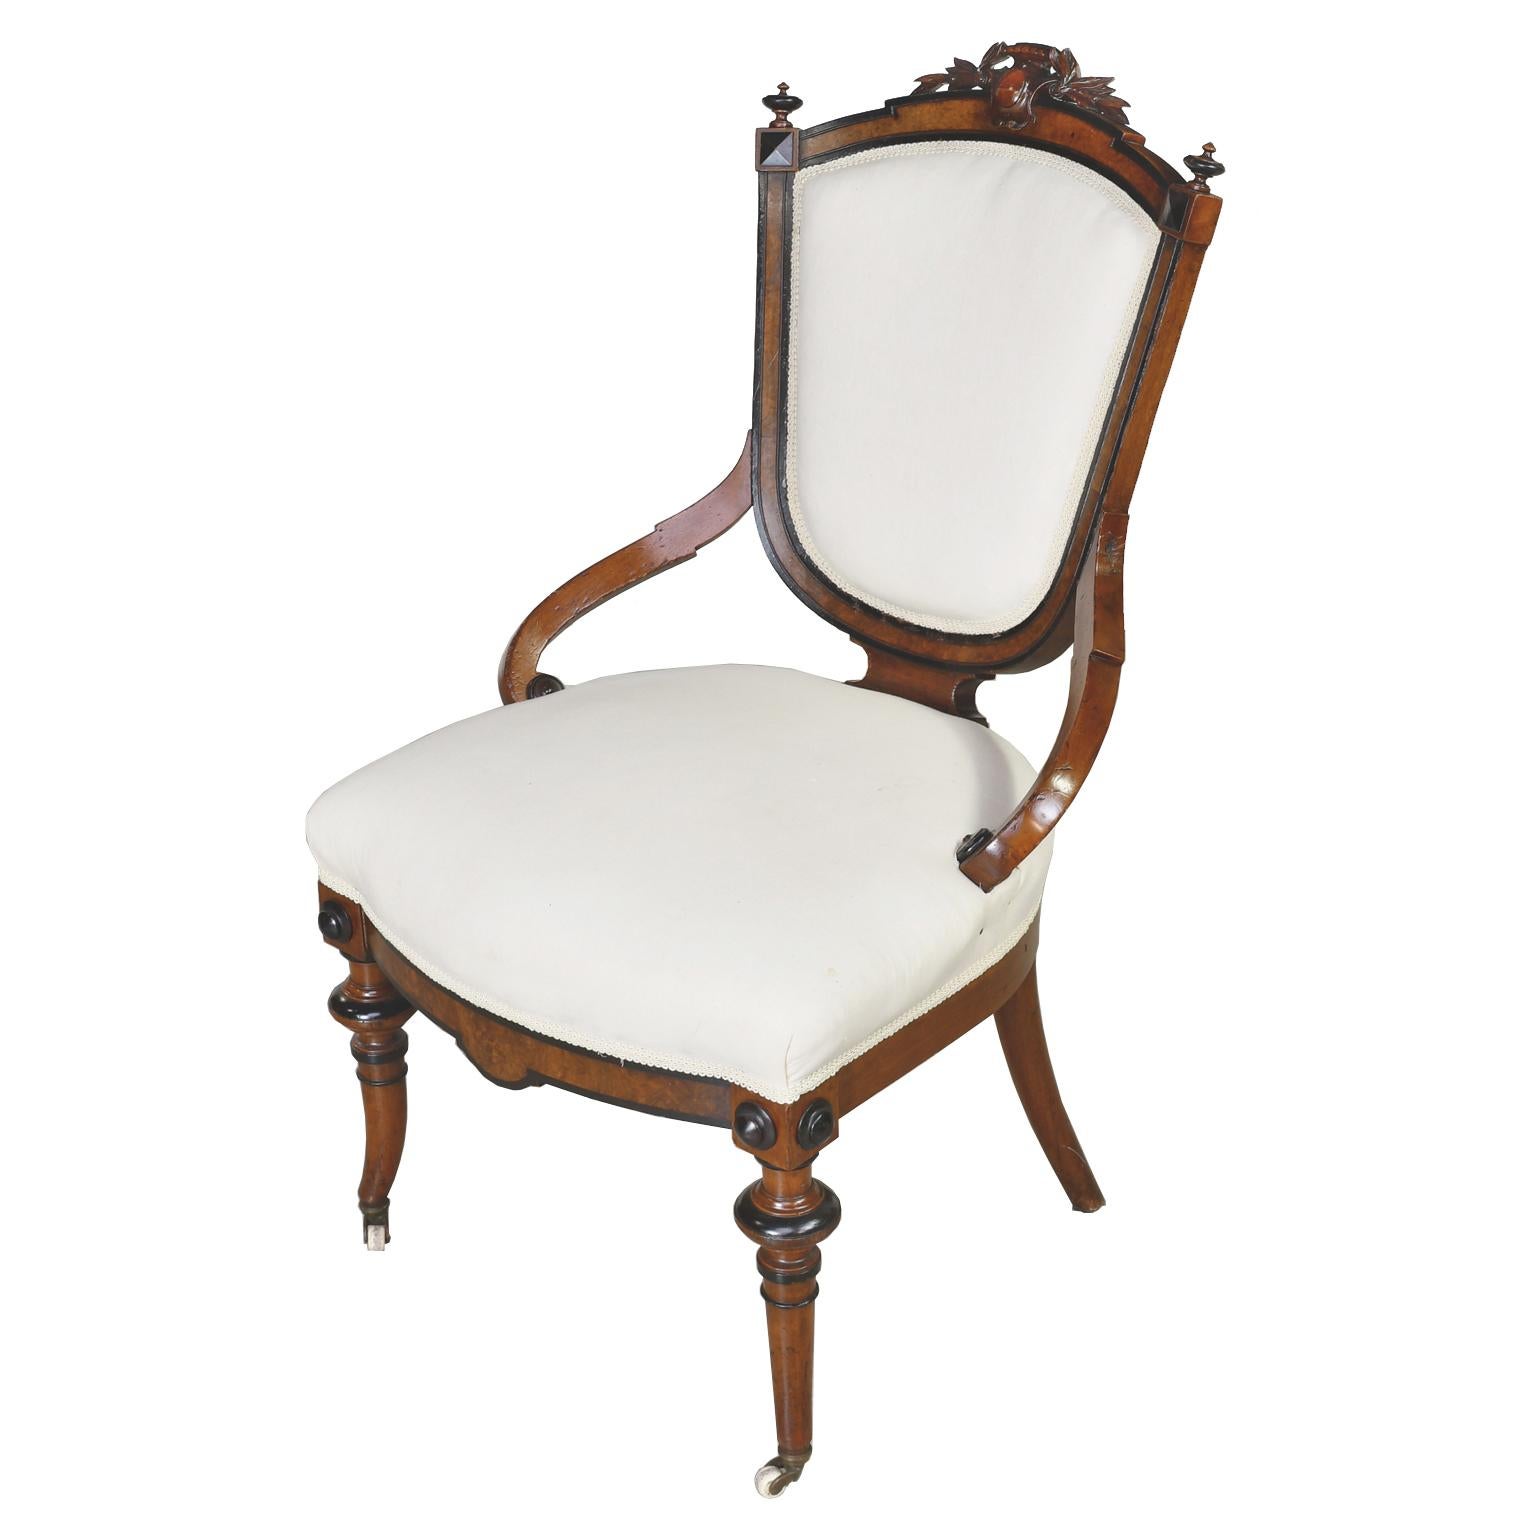 Pair of Napoleon III Upholstered Armchairs in Ebonized & Burl Walnut, circa 1870 For Sale 1